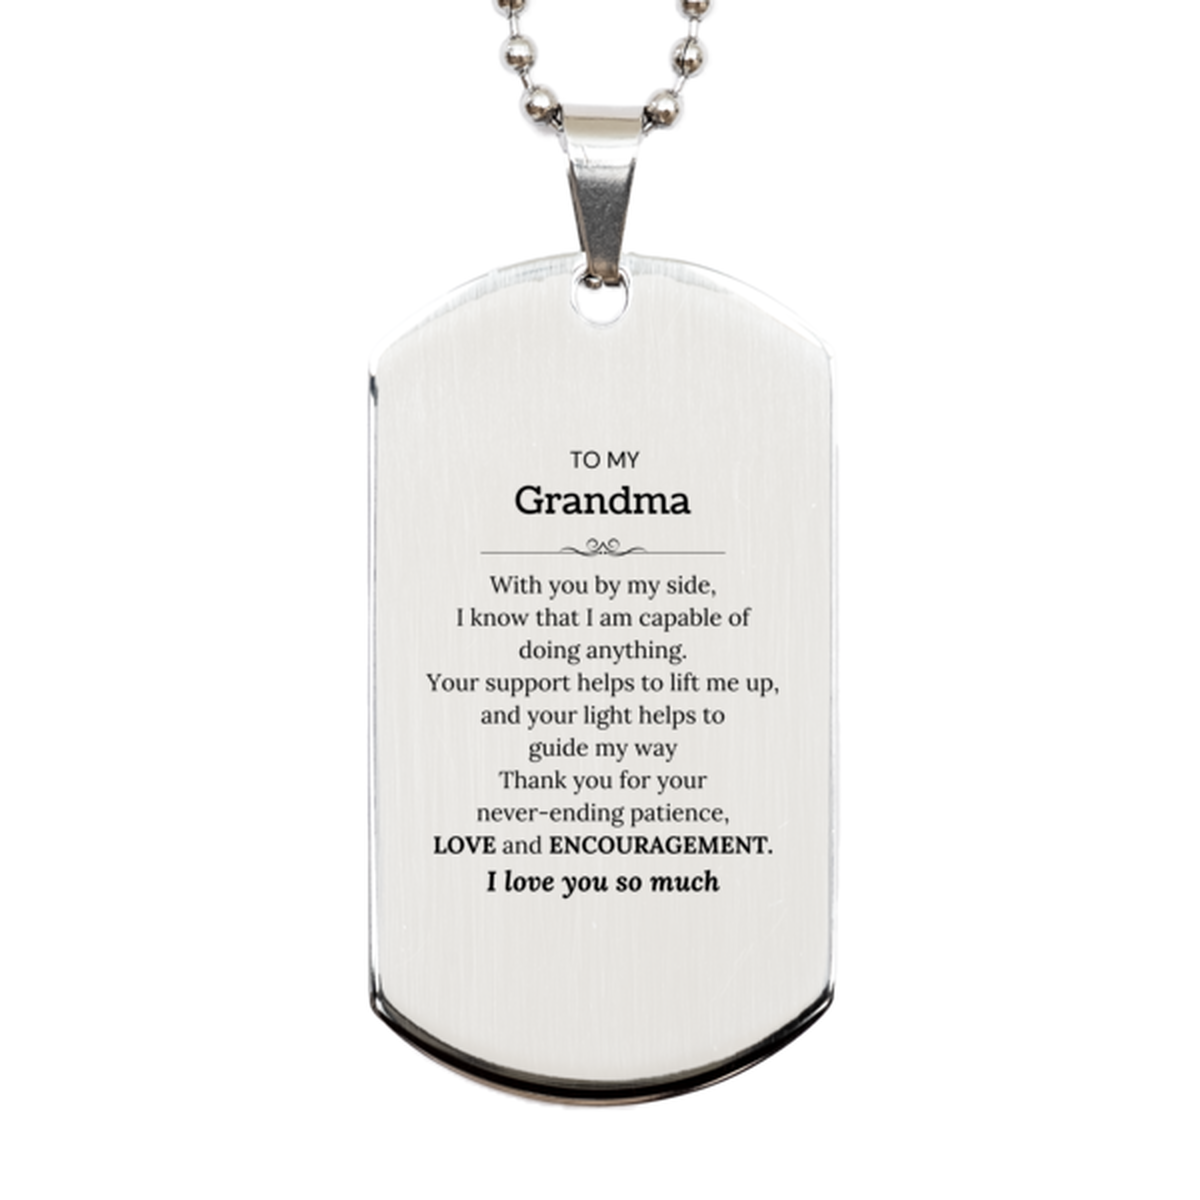 Appreciation Grandma Silver Dog Tag Gifts, To My Grandma Birthday Christmas Wedding Keepsake Gifts for Grandma With you by my side, I know that I am capable of doing anything. I love you so much